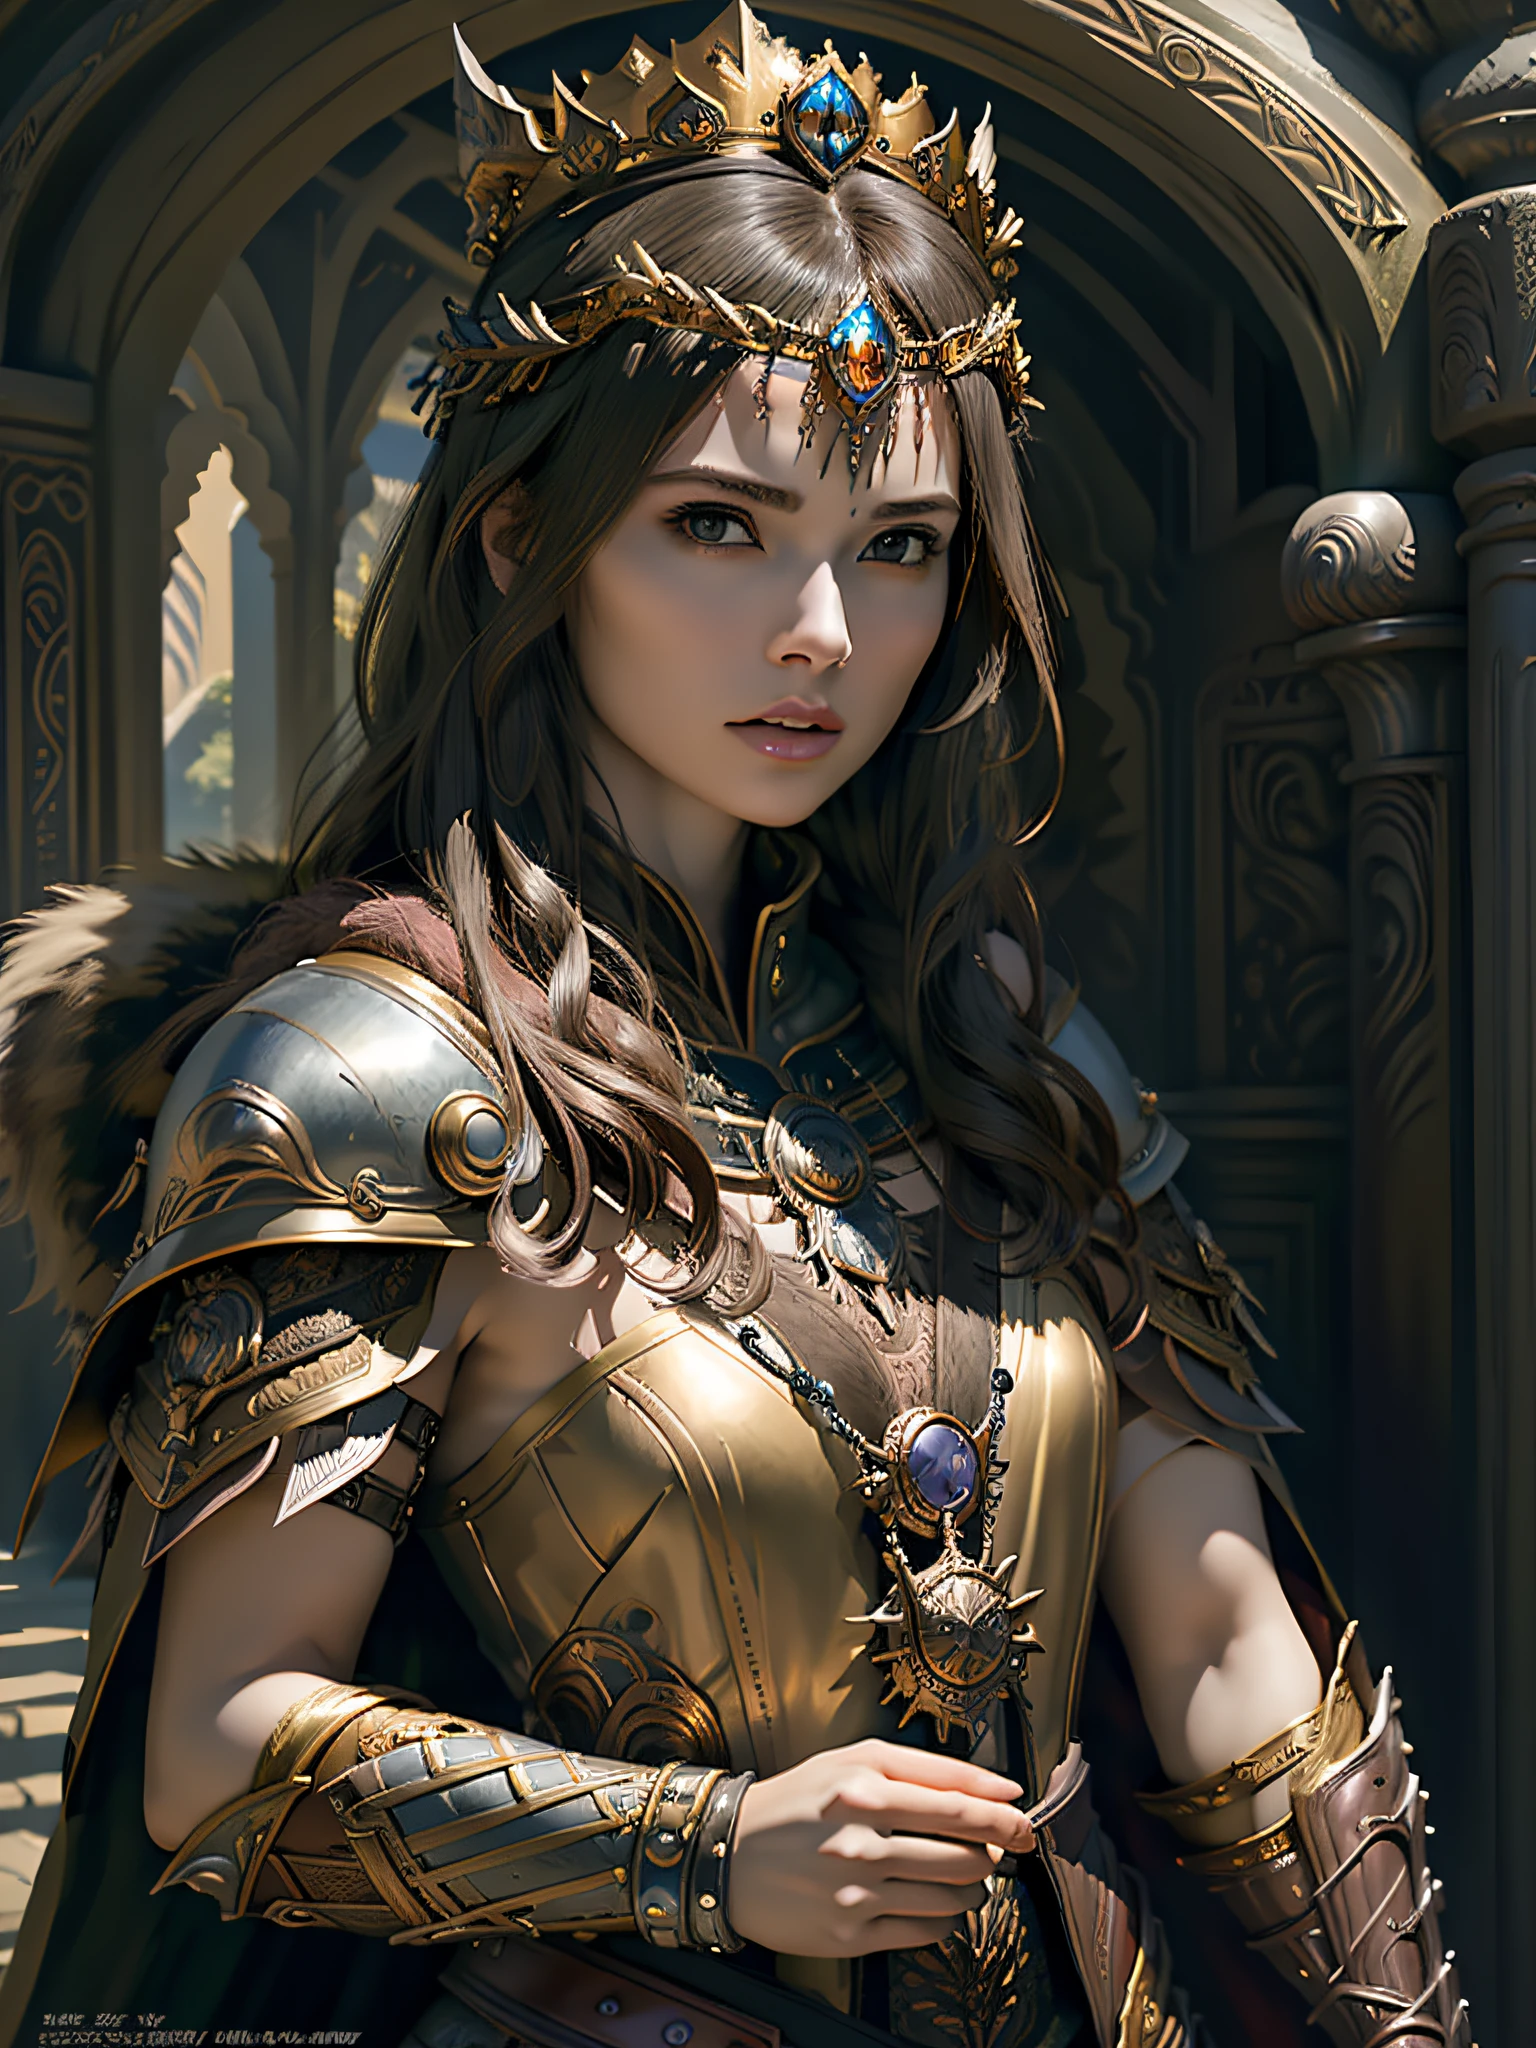 (Masterpiece, Top Quality, Top Quality, Official Art, Beautiful and Aesthetic: 1.2), (1 Girl), (Warrior Queen Armor, Fur-Lined Cape, Bejeweled Crown: 1.2), Serious, Black Hair, Colossal, Ultimate Jewel, 100pcs, Gorgeous,